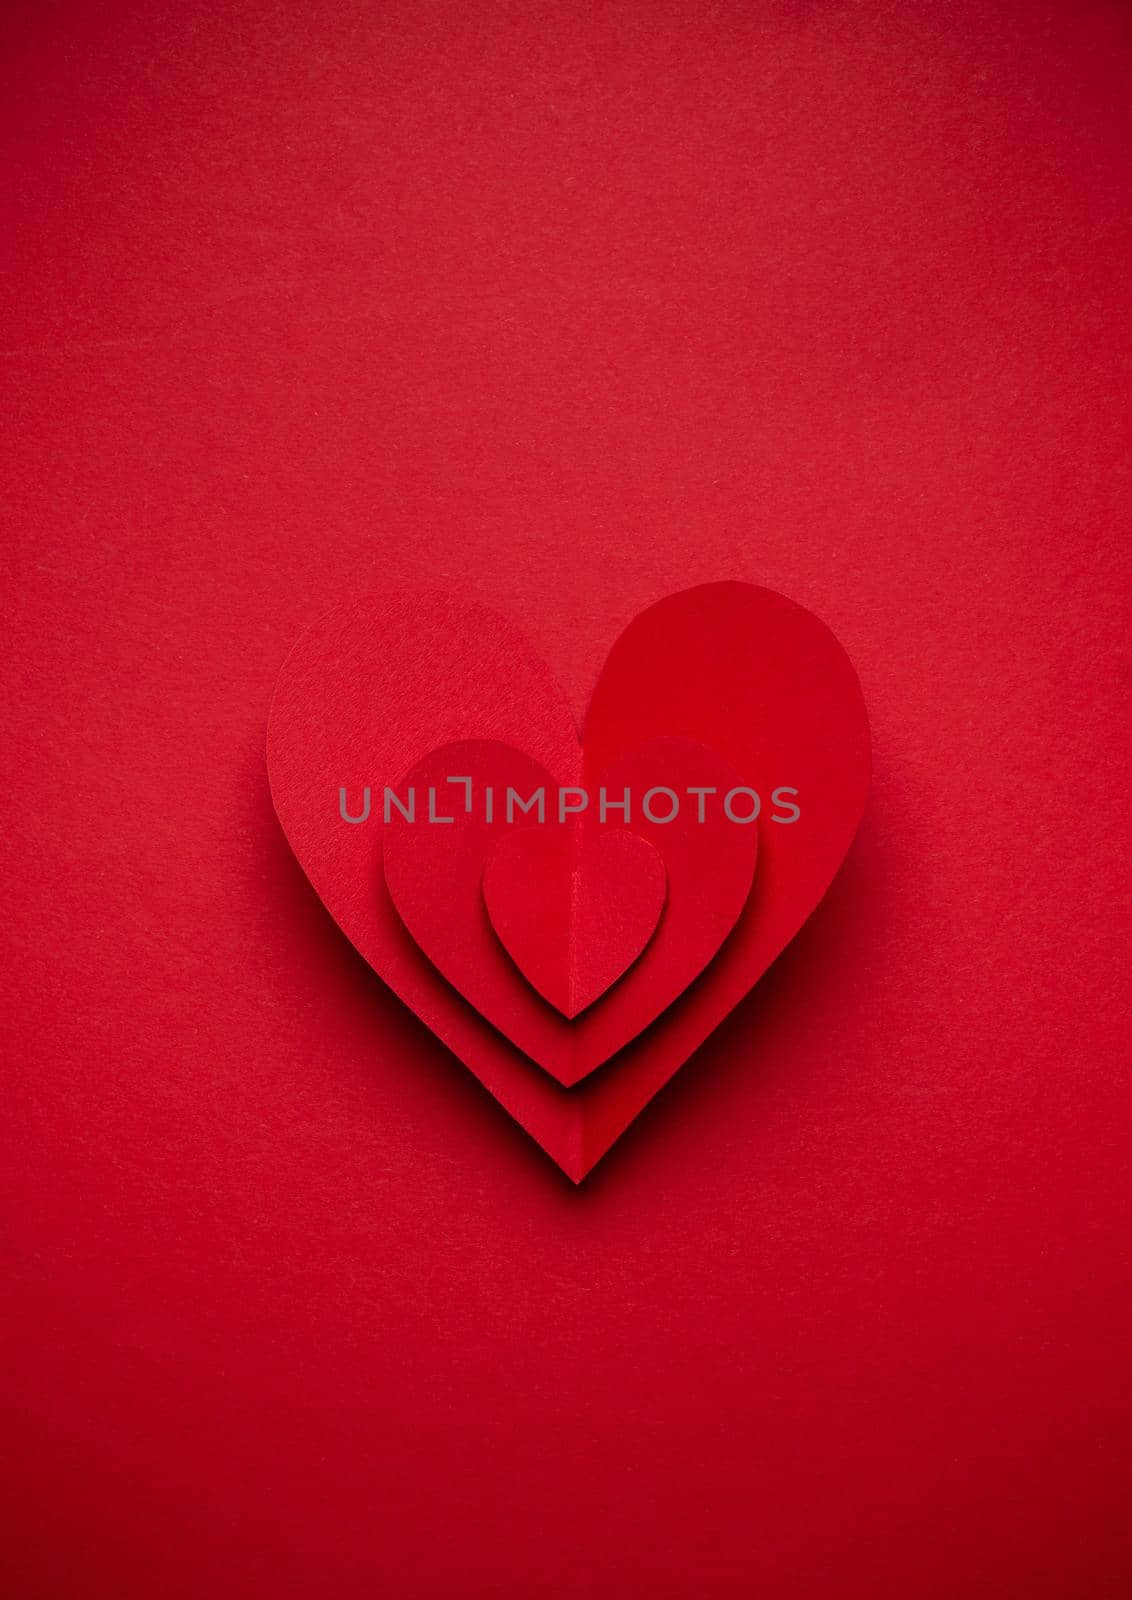 Big voluminous red heart cut from paper on red monochrome background, paper craft origami style, from above. Romantic Valentine's day symbol, love concept. Paper art design, 14 February celebration.